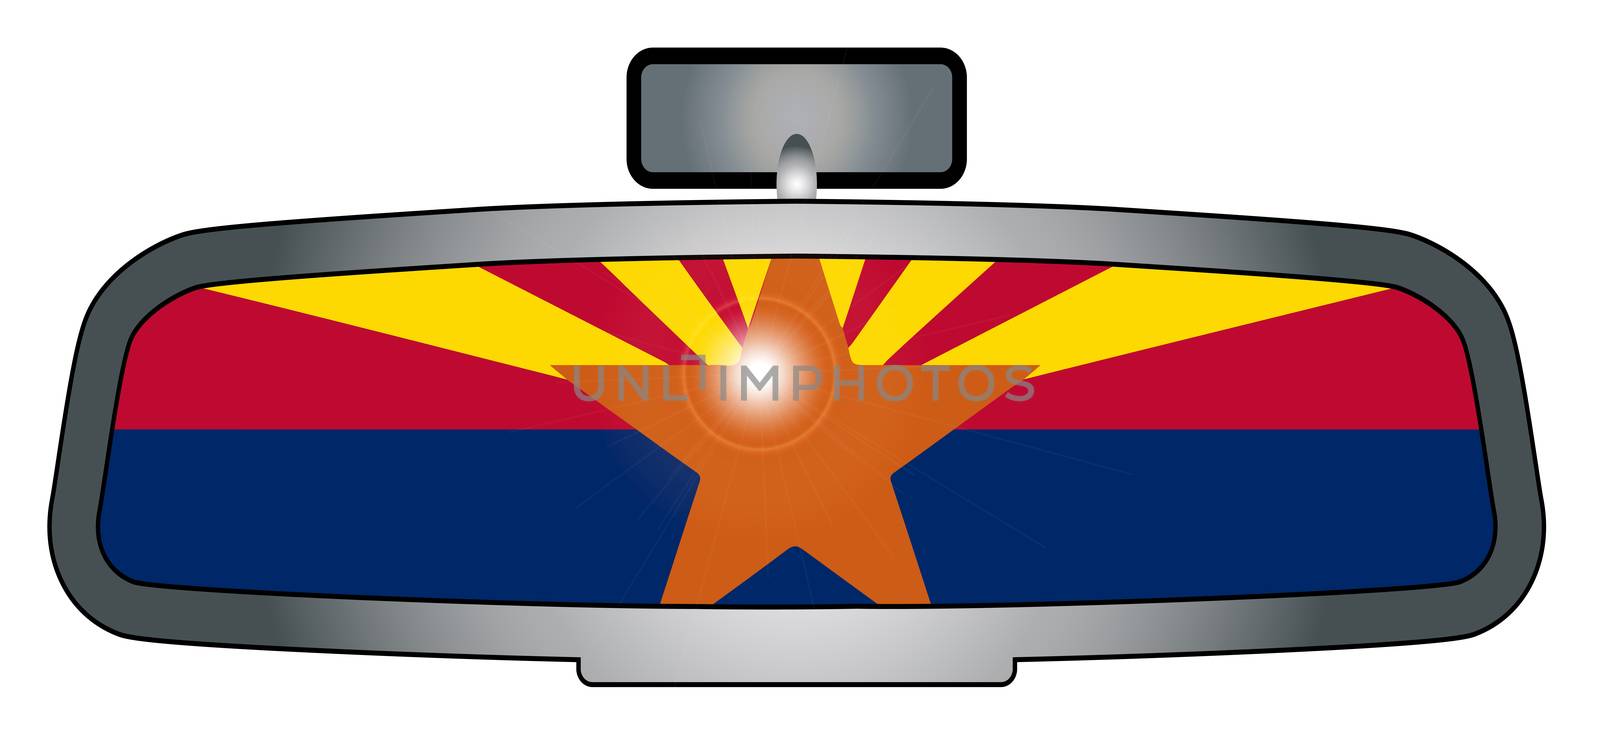 A vehicle rear view mirror with the flag of the state of Arizona